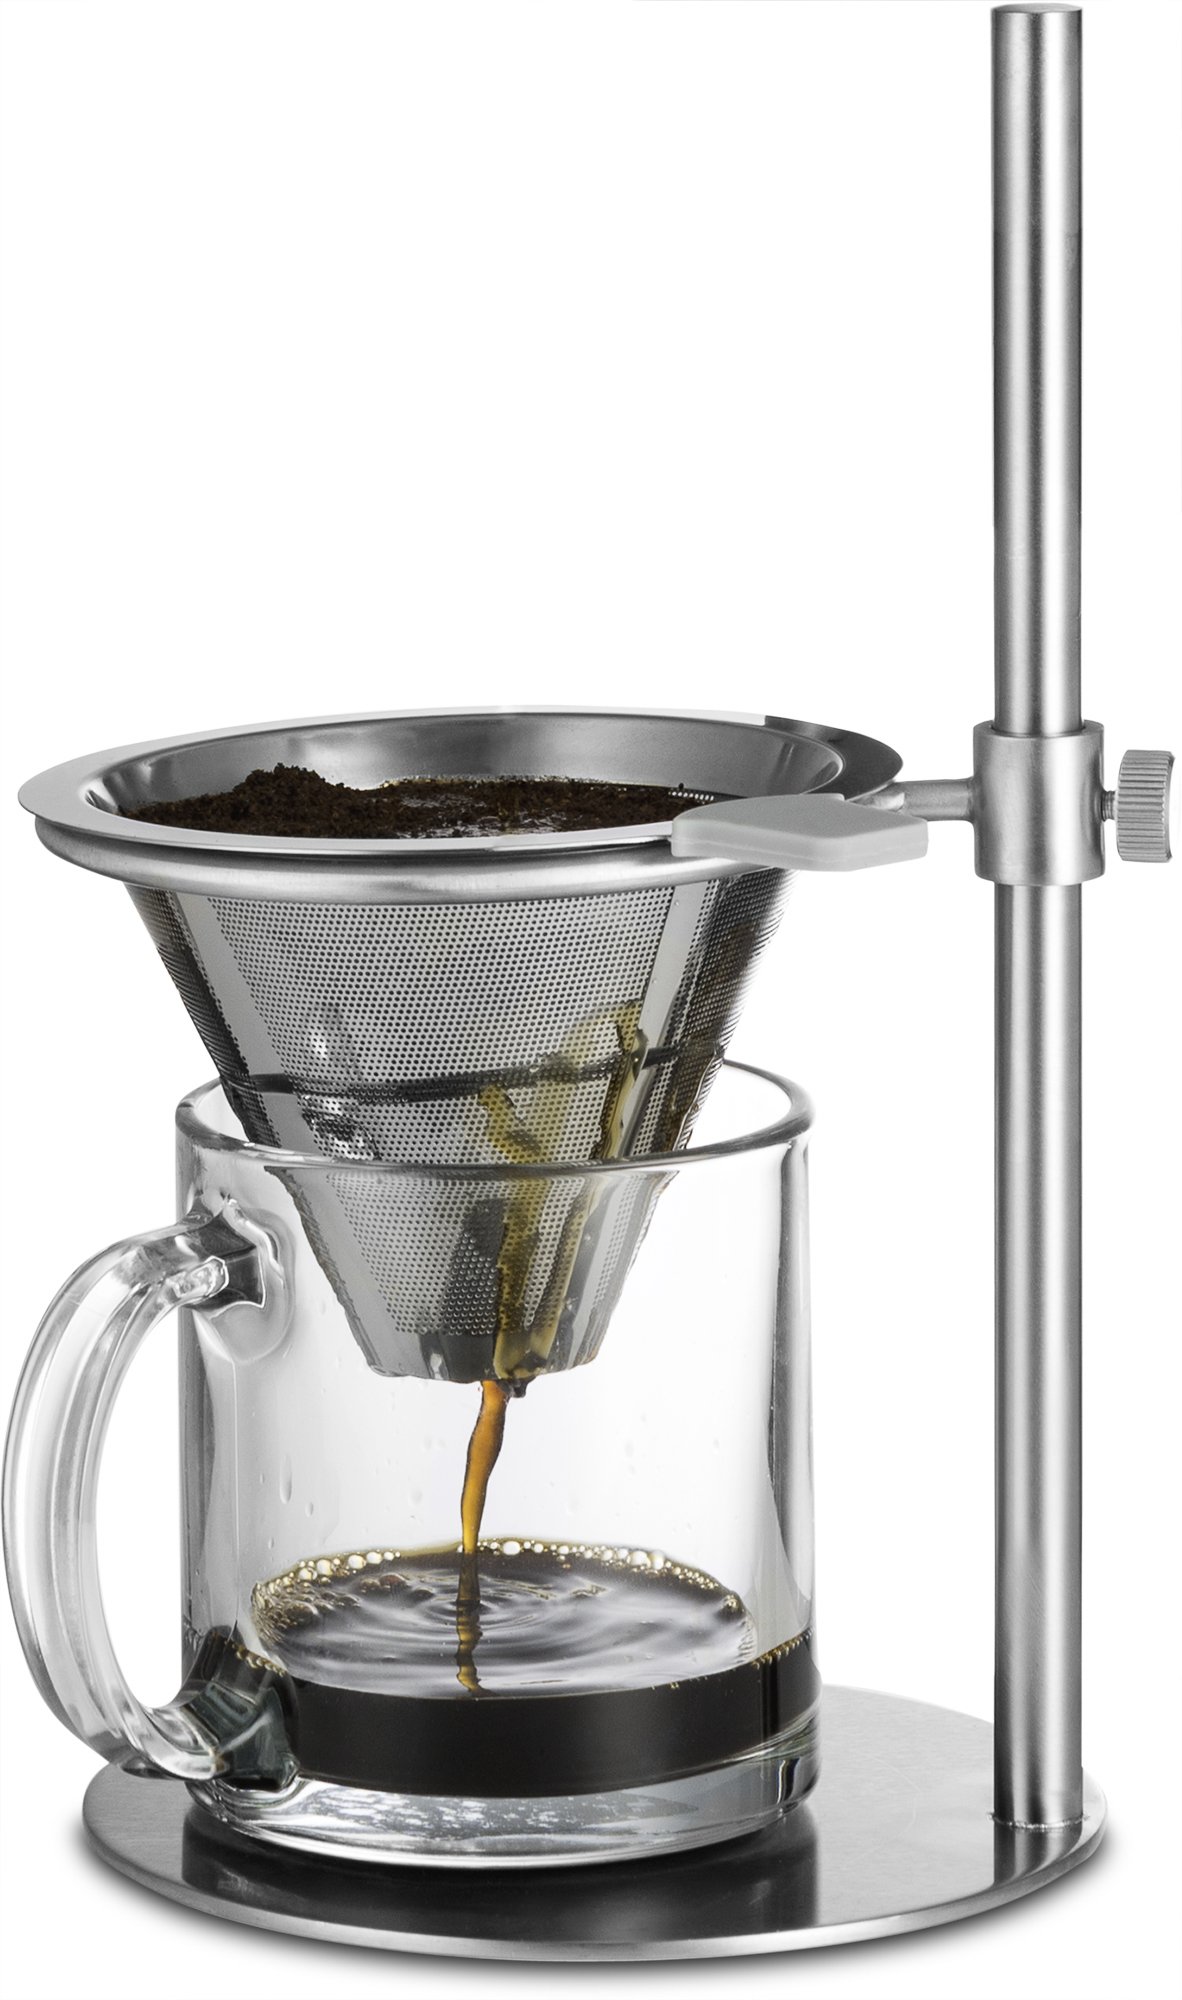 Gourmia GVD9320 Pour Over Stand Coffee Station - Freestanding Drip Coffee Stand with Reusable Stainless Steel Cone Filter - Make Coffee Directly into Mug, Cup or Thermos - Stainless Steel